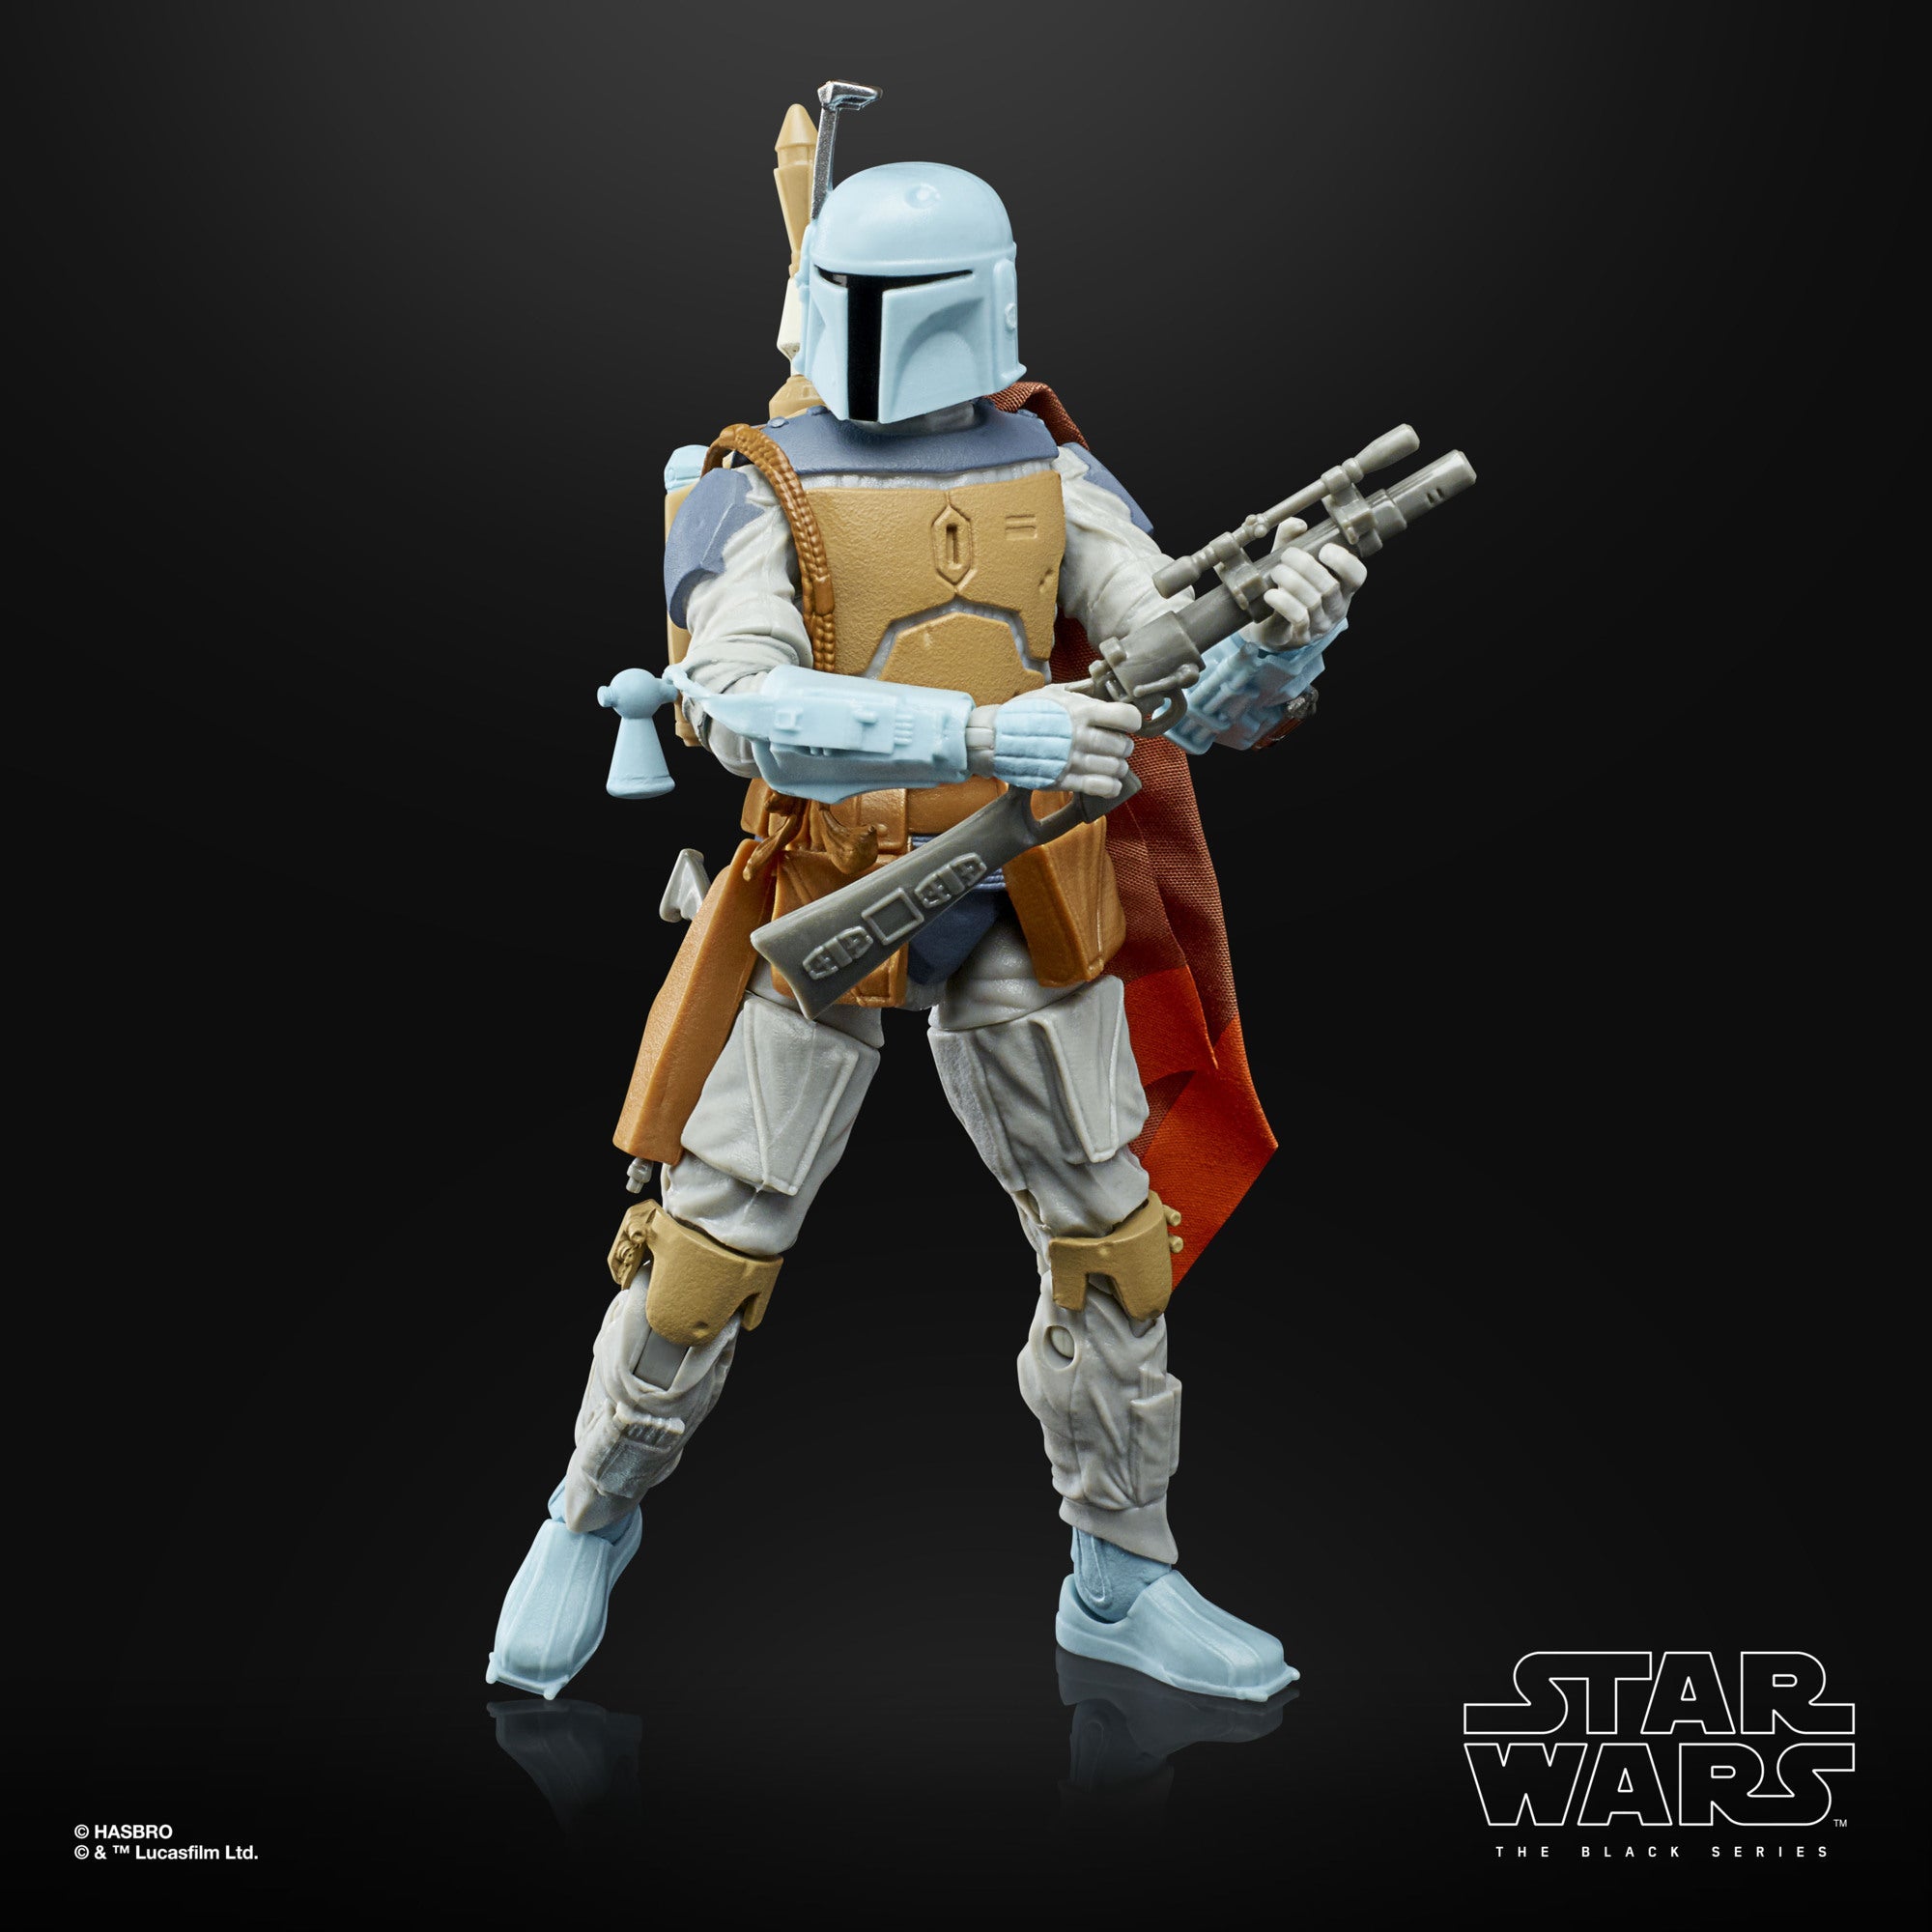 Hasbro Star Wars Black Series 50th Anniversary Legends Boba Fett (Droids) Exclusive 6 Inch Action Figure